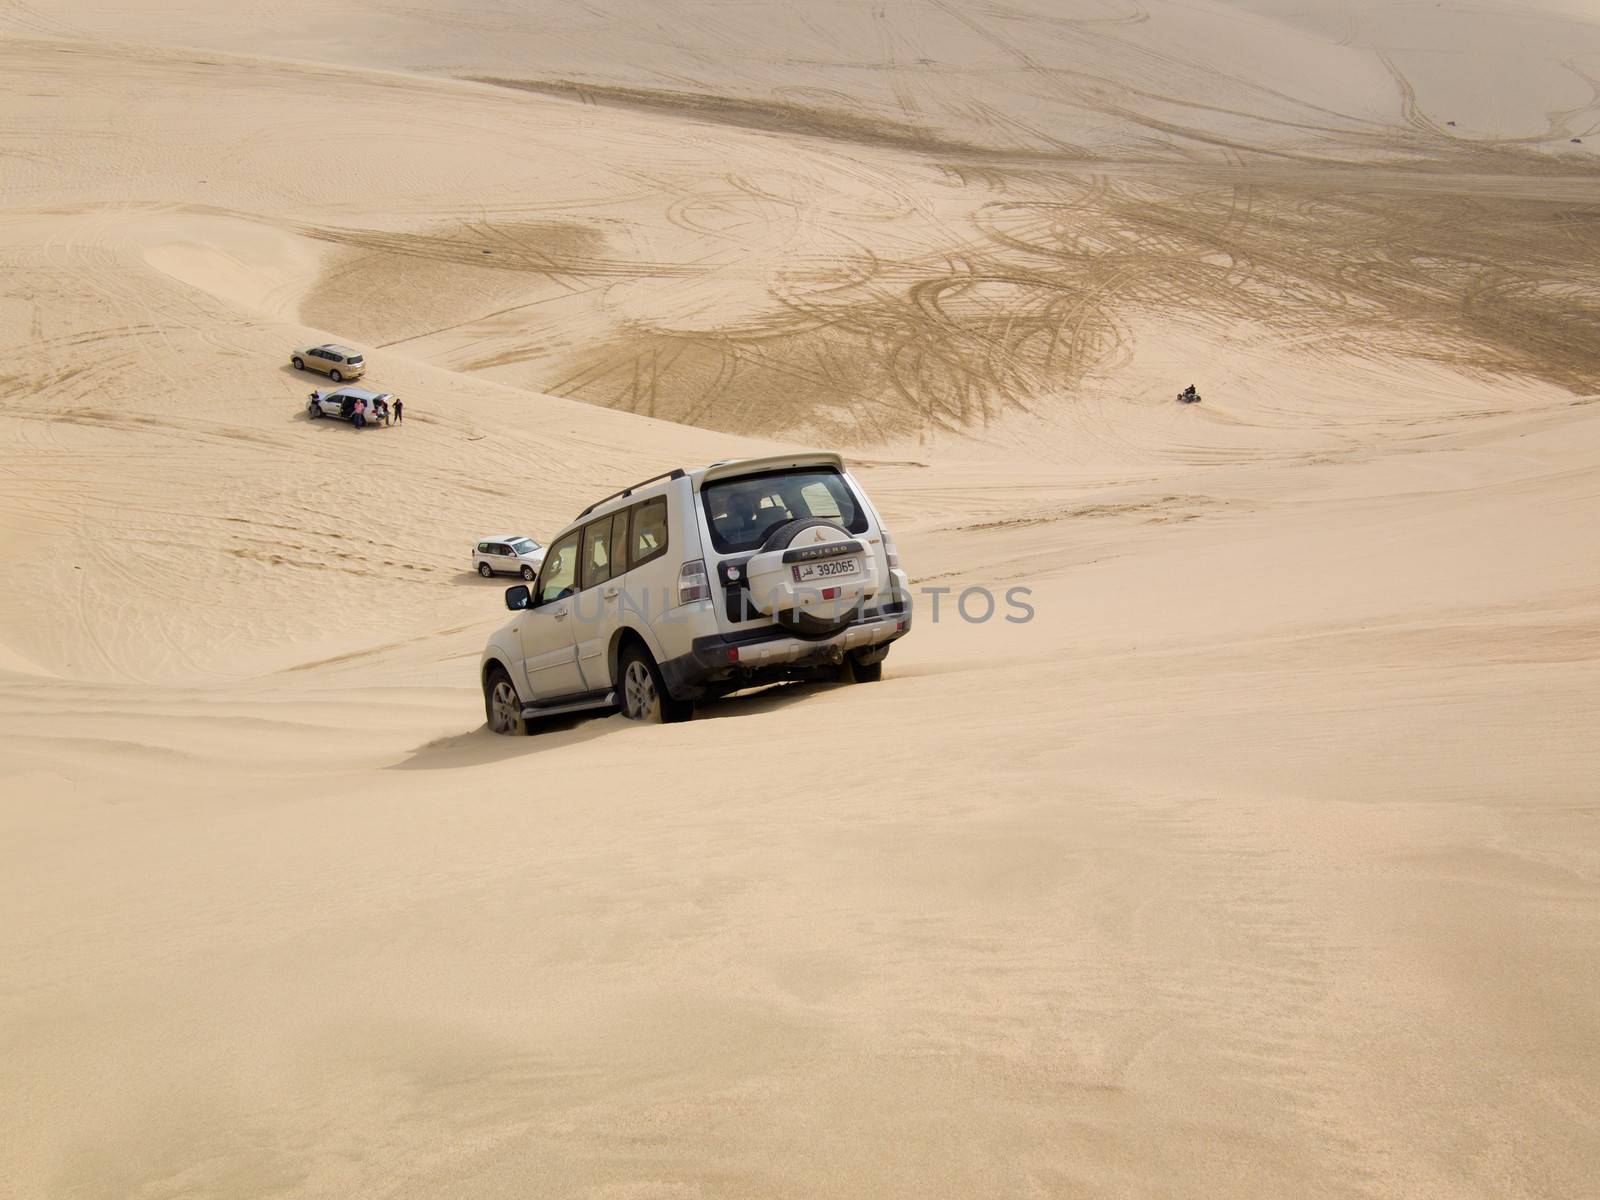 Mesaieed, Qatar – January 10, 2014: 4WD driving on a sand dune in the desert, called dune bashing, in the south of Qatar.